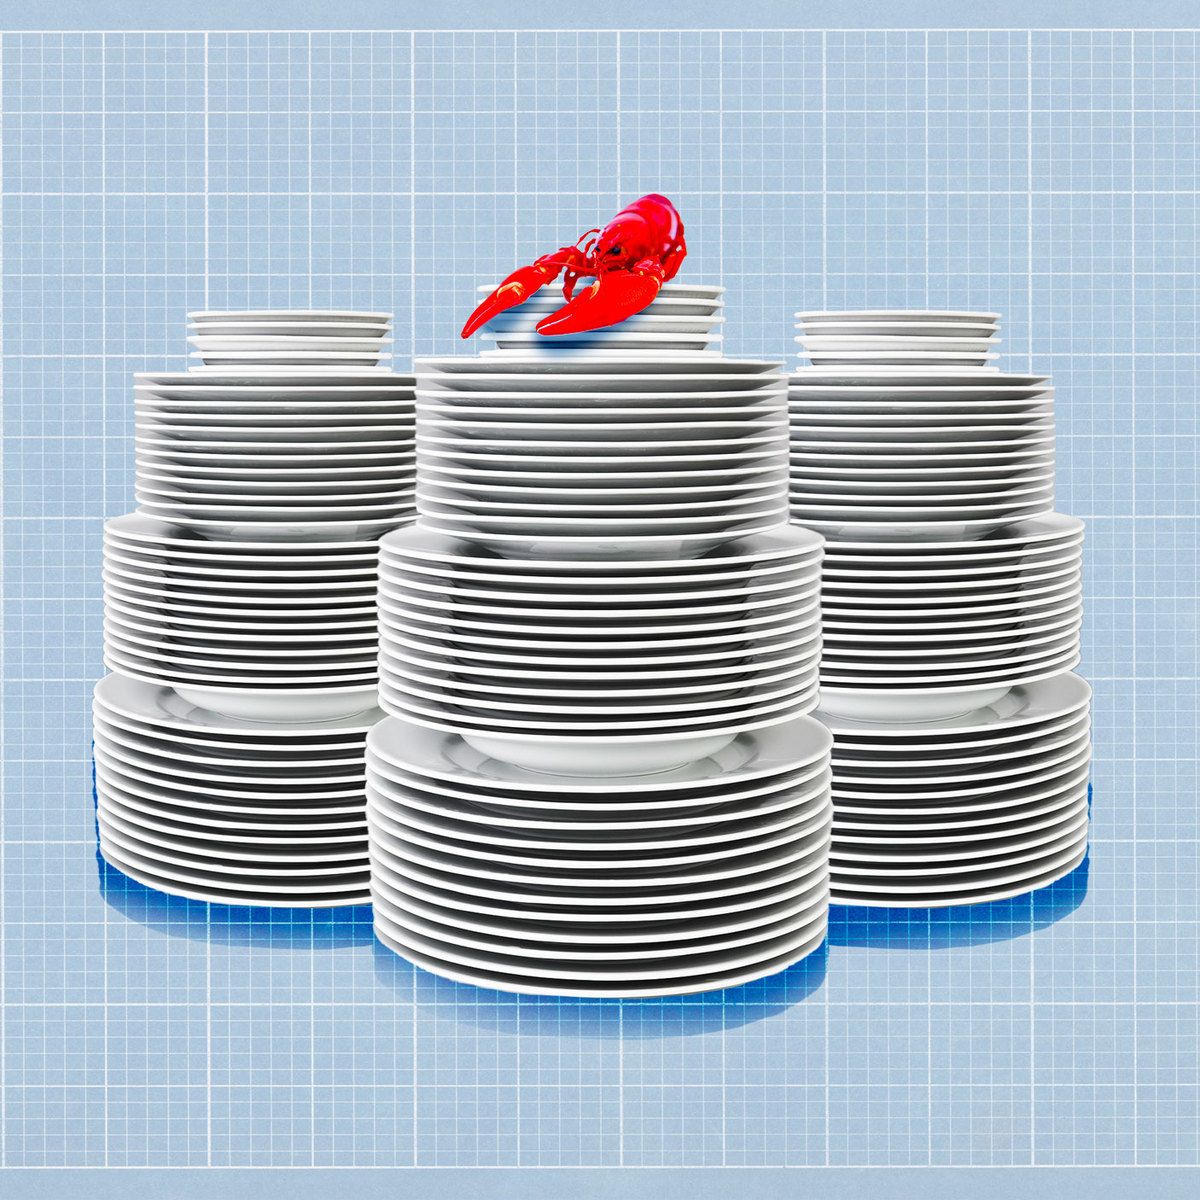 plates stacked on top of graph with red lobster